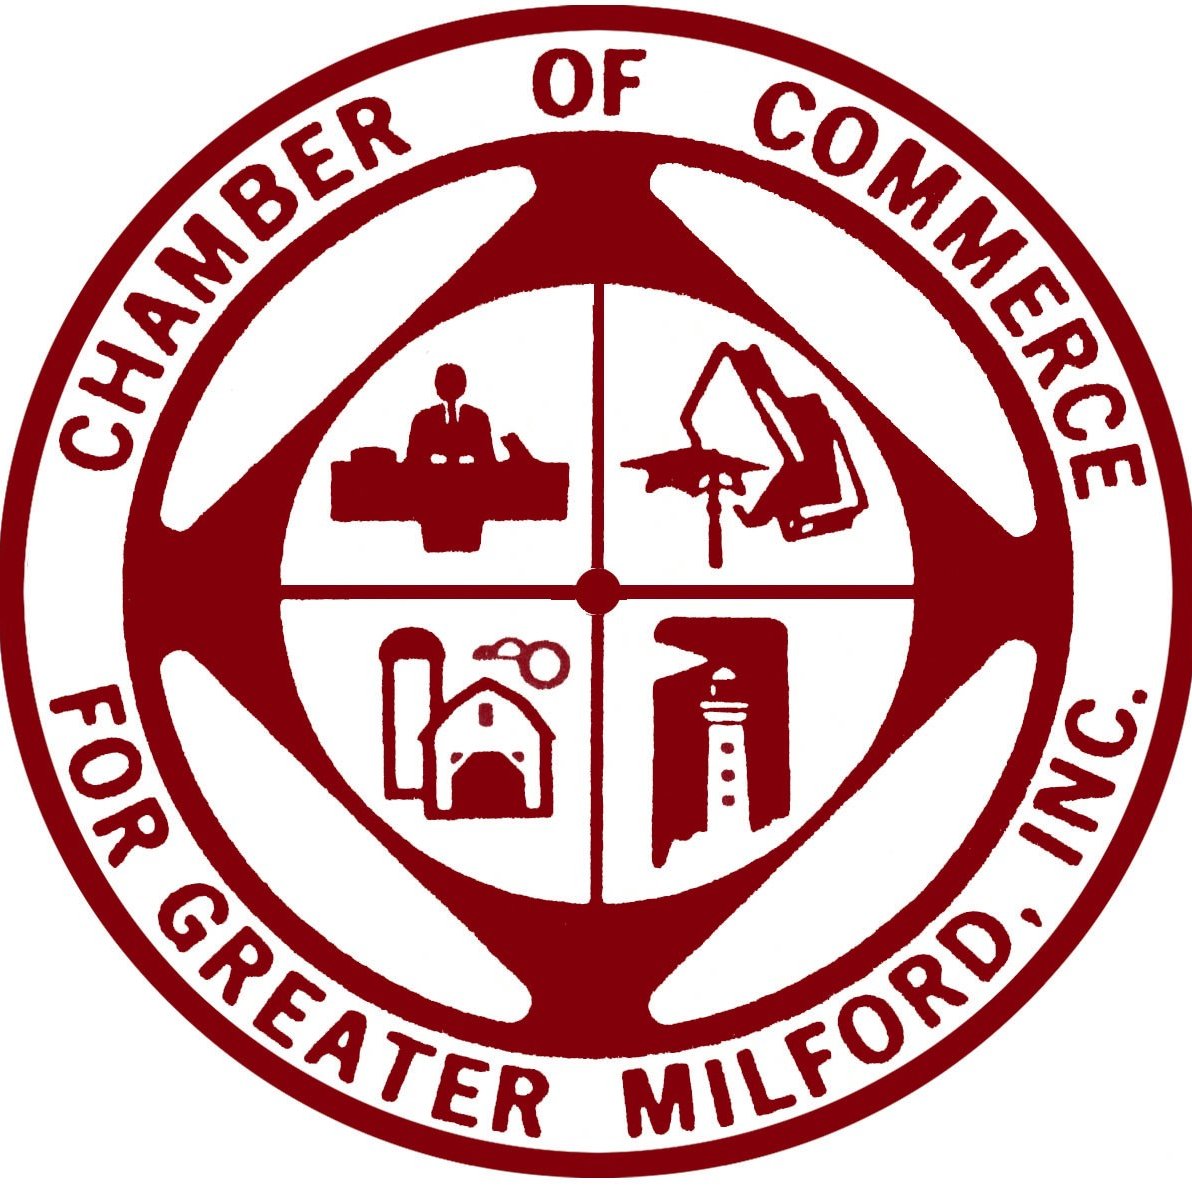 The CCGM supports a balanced economic development of the Greater Milford.